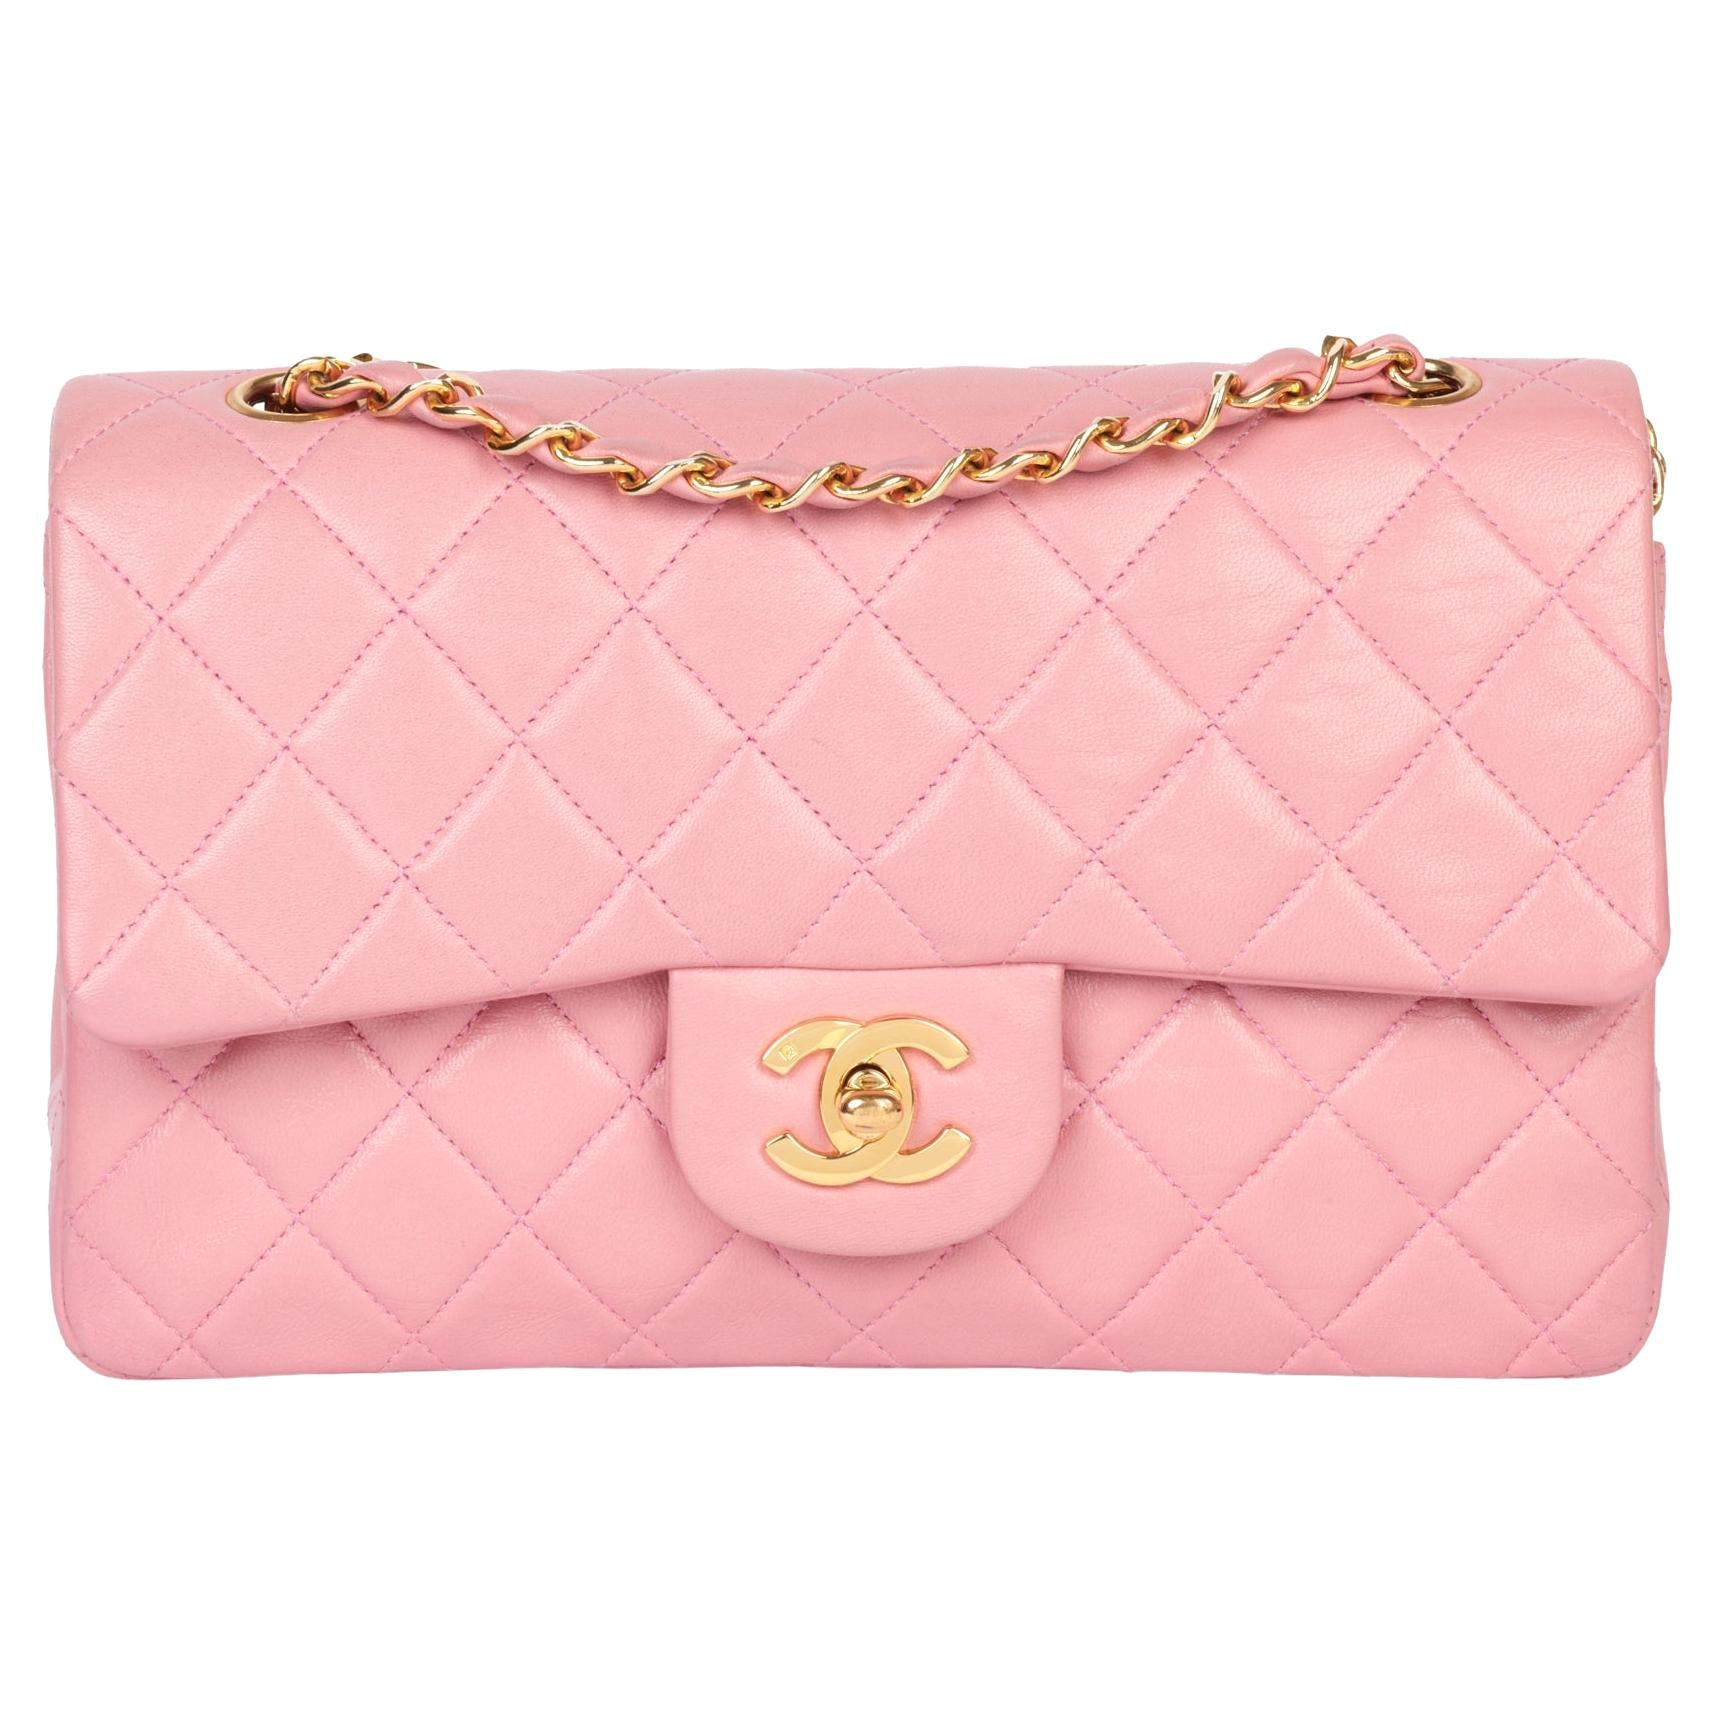 RARE* Authentic Chanel Barbie Pink Medium Classic Flap Bag with